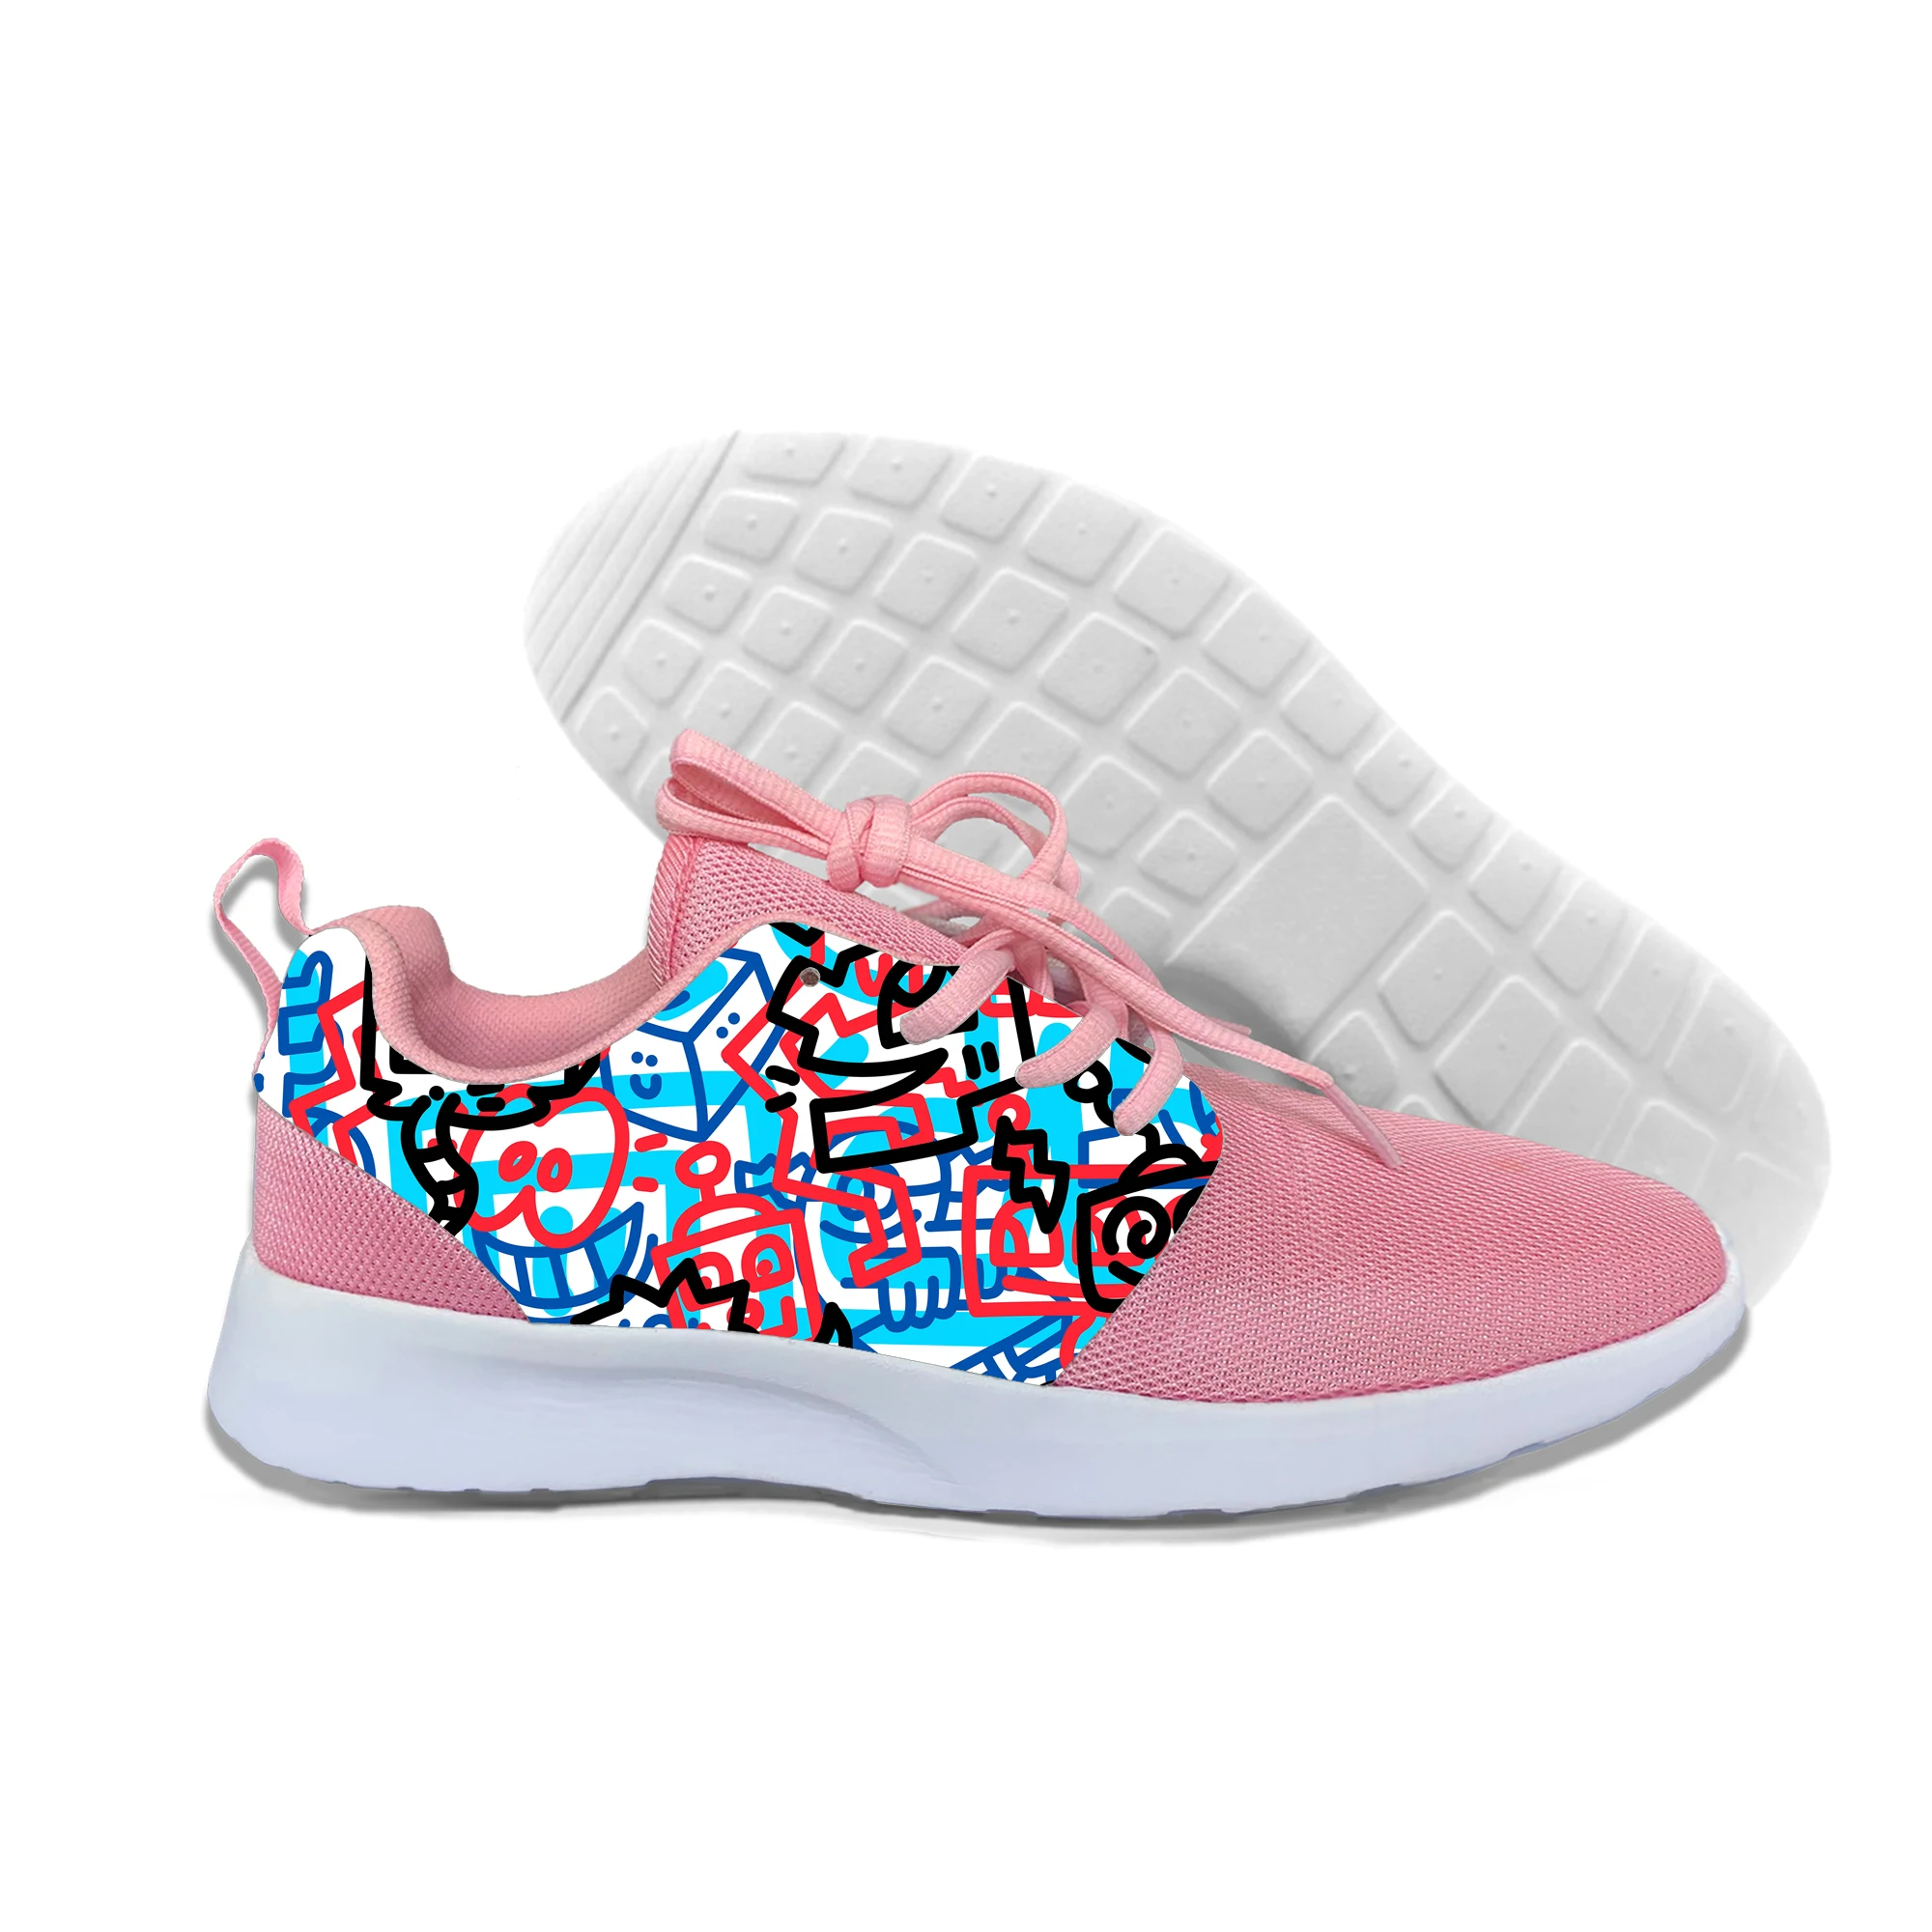 

Mr Doodle 2021 New Mesh Women Men Flat Shoes Lightweight Women Sneakers Breathable Casual Shoes Chaussure Plus Size